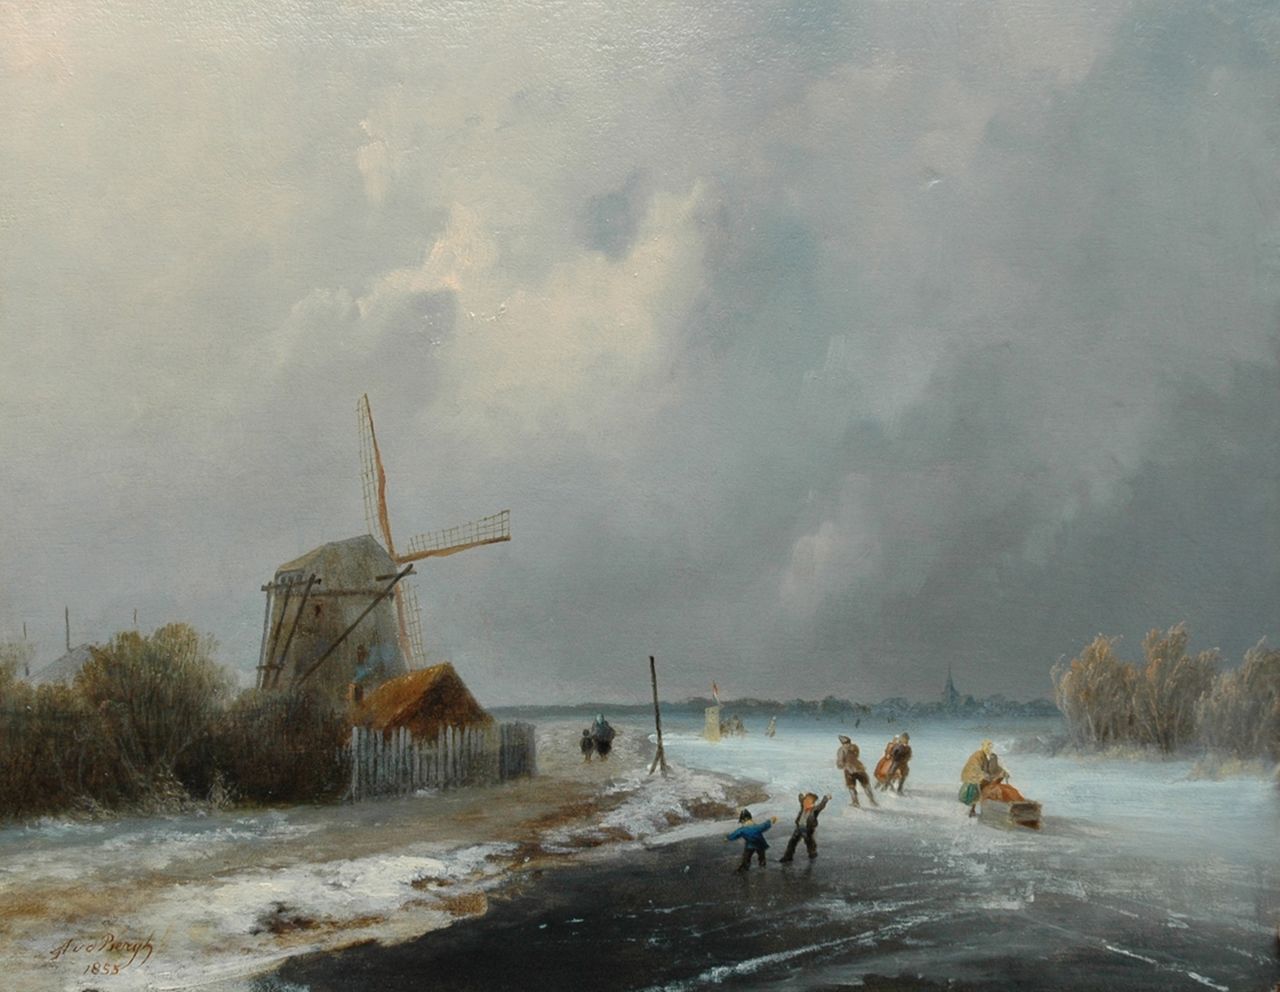 Bergh A. van den | Andries van den Bergh, A winter scene with skaters near a windmill, oil on panel 30.4 x 38.6 cm, signed l.l. and dated 1855